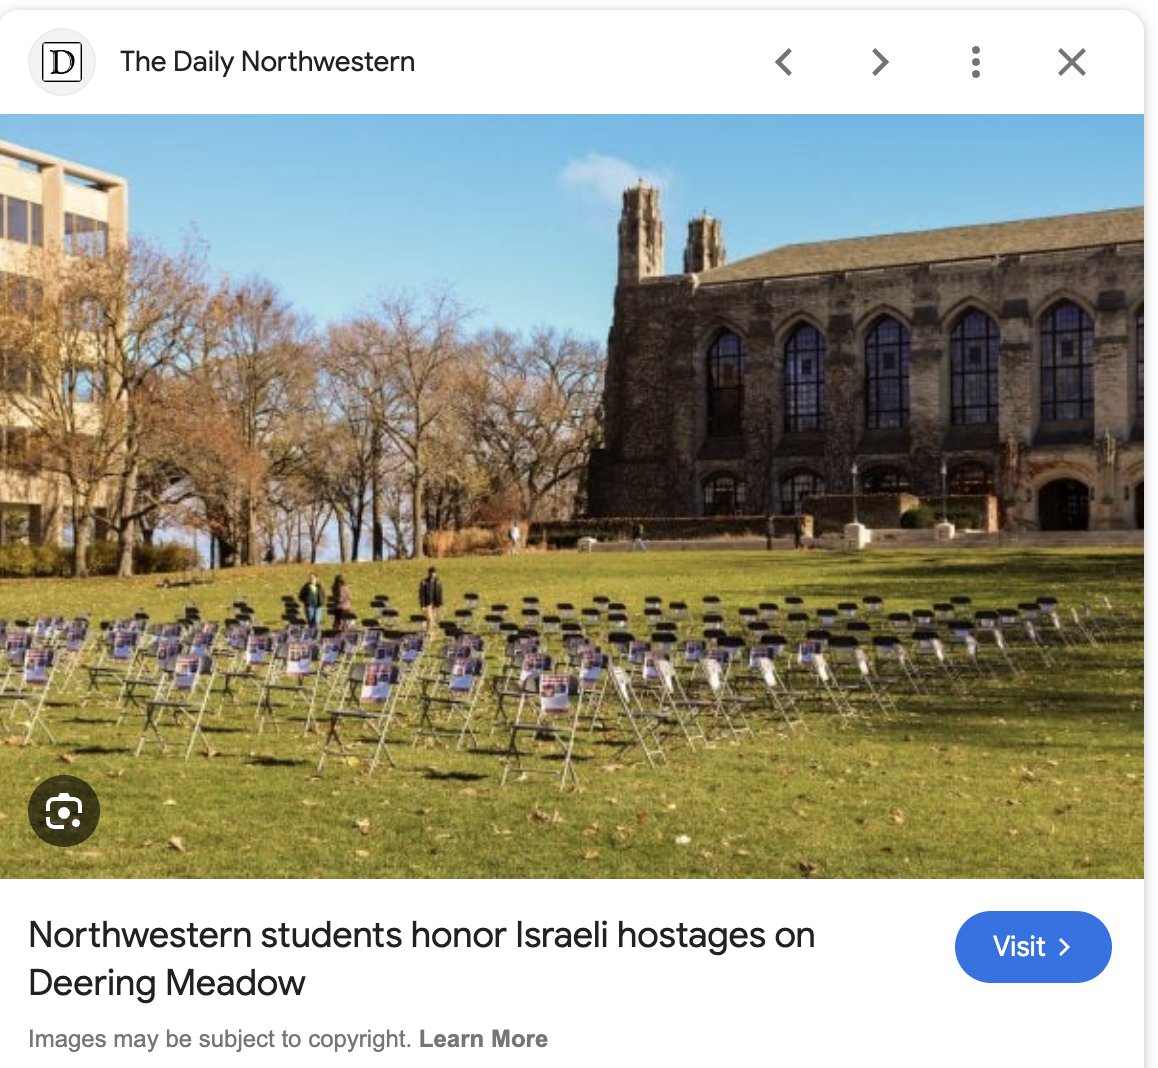 A thread of other things that have involved tents, assembly, and sound amplification at Northwestern and on Deering Meadow @thedailynu. Here is an action demanding the safe return of hostages taken by Hamas on Oct 7